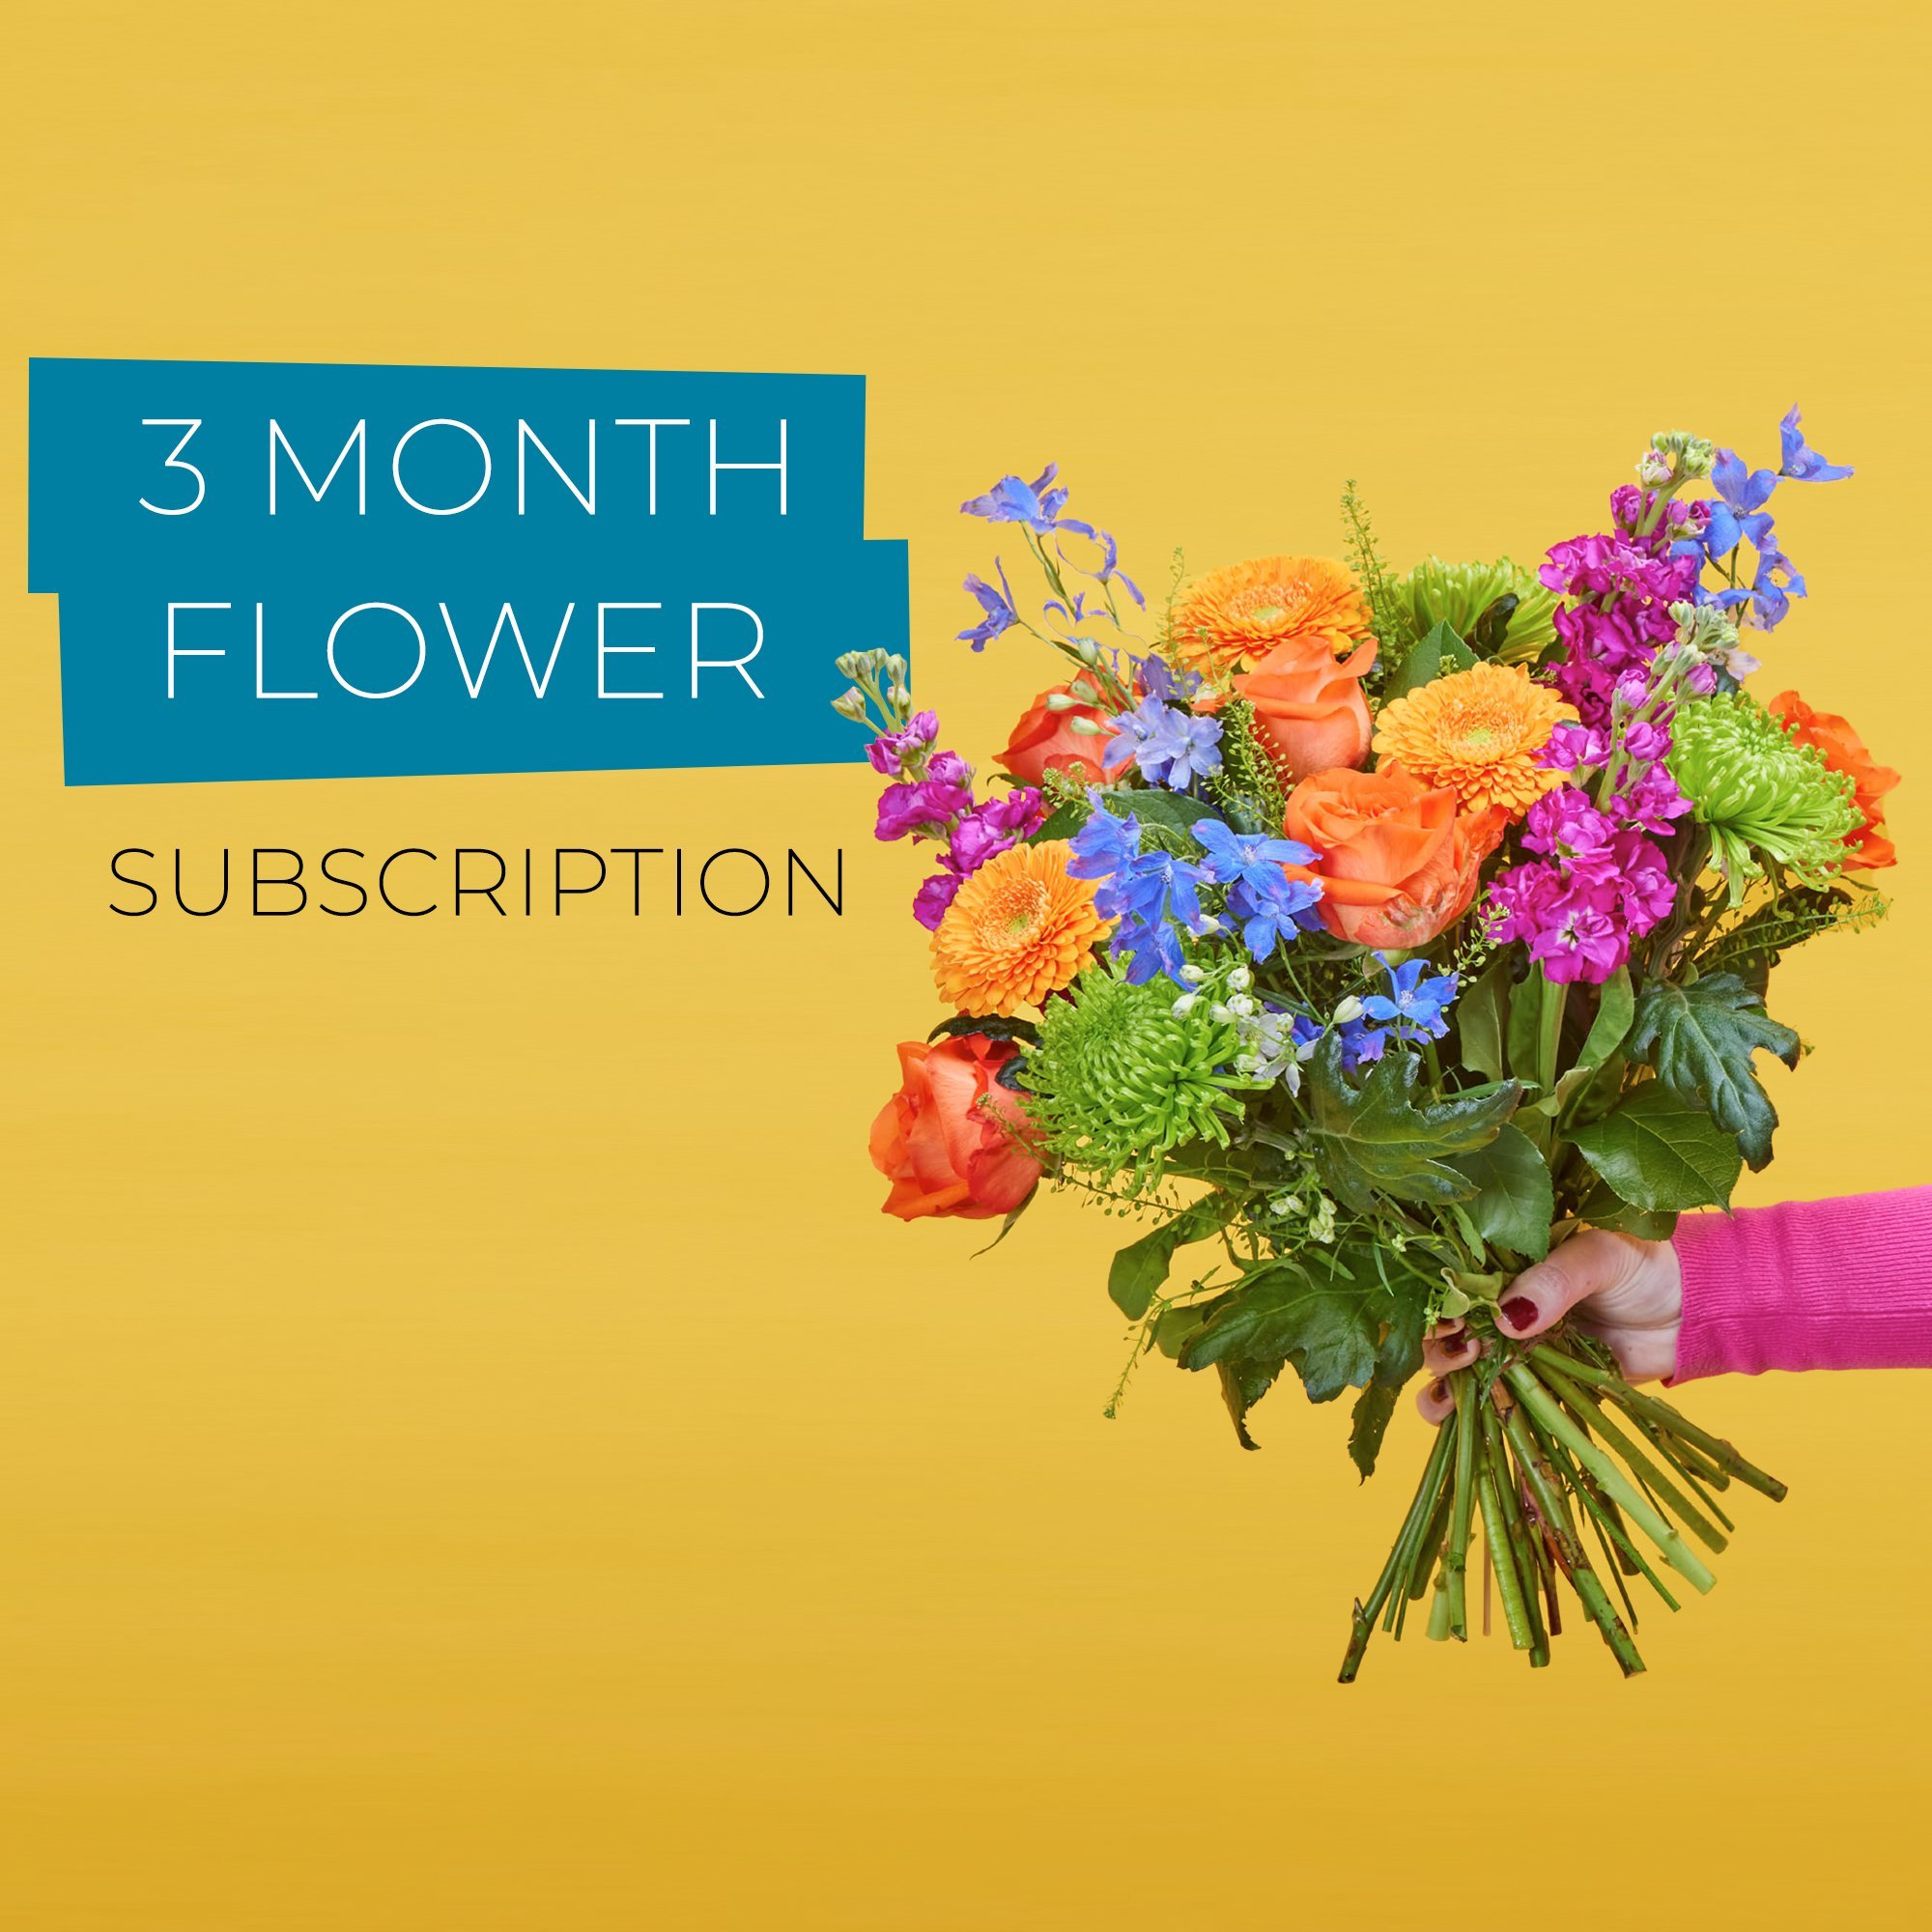 3 Month Flower Subscription image